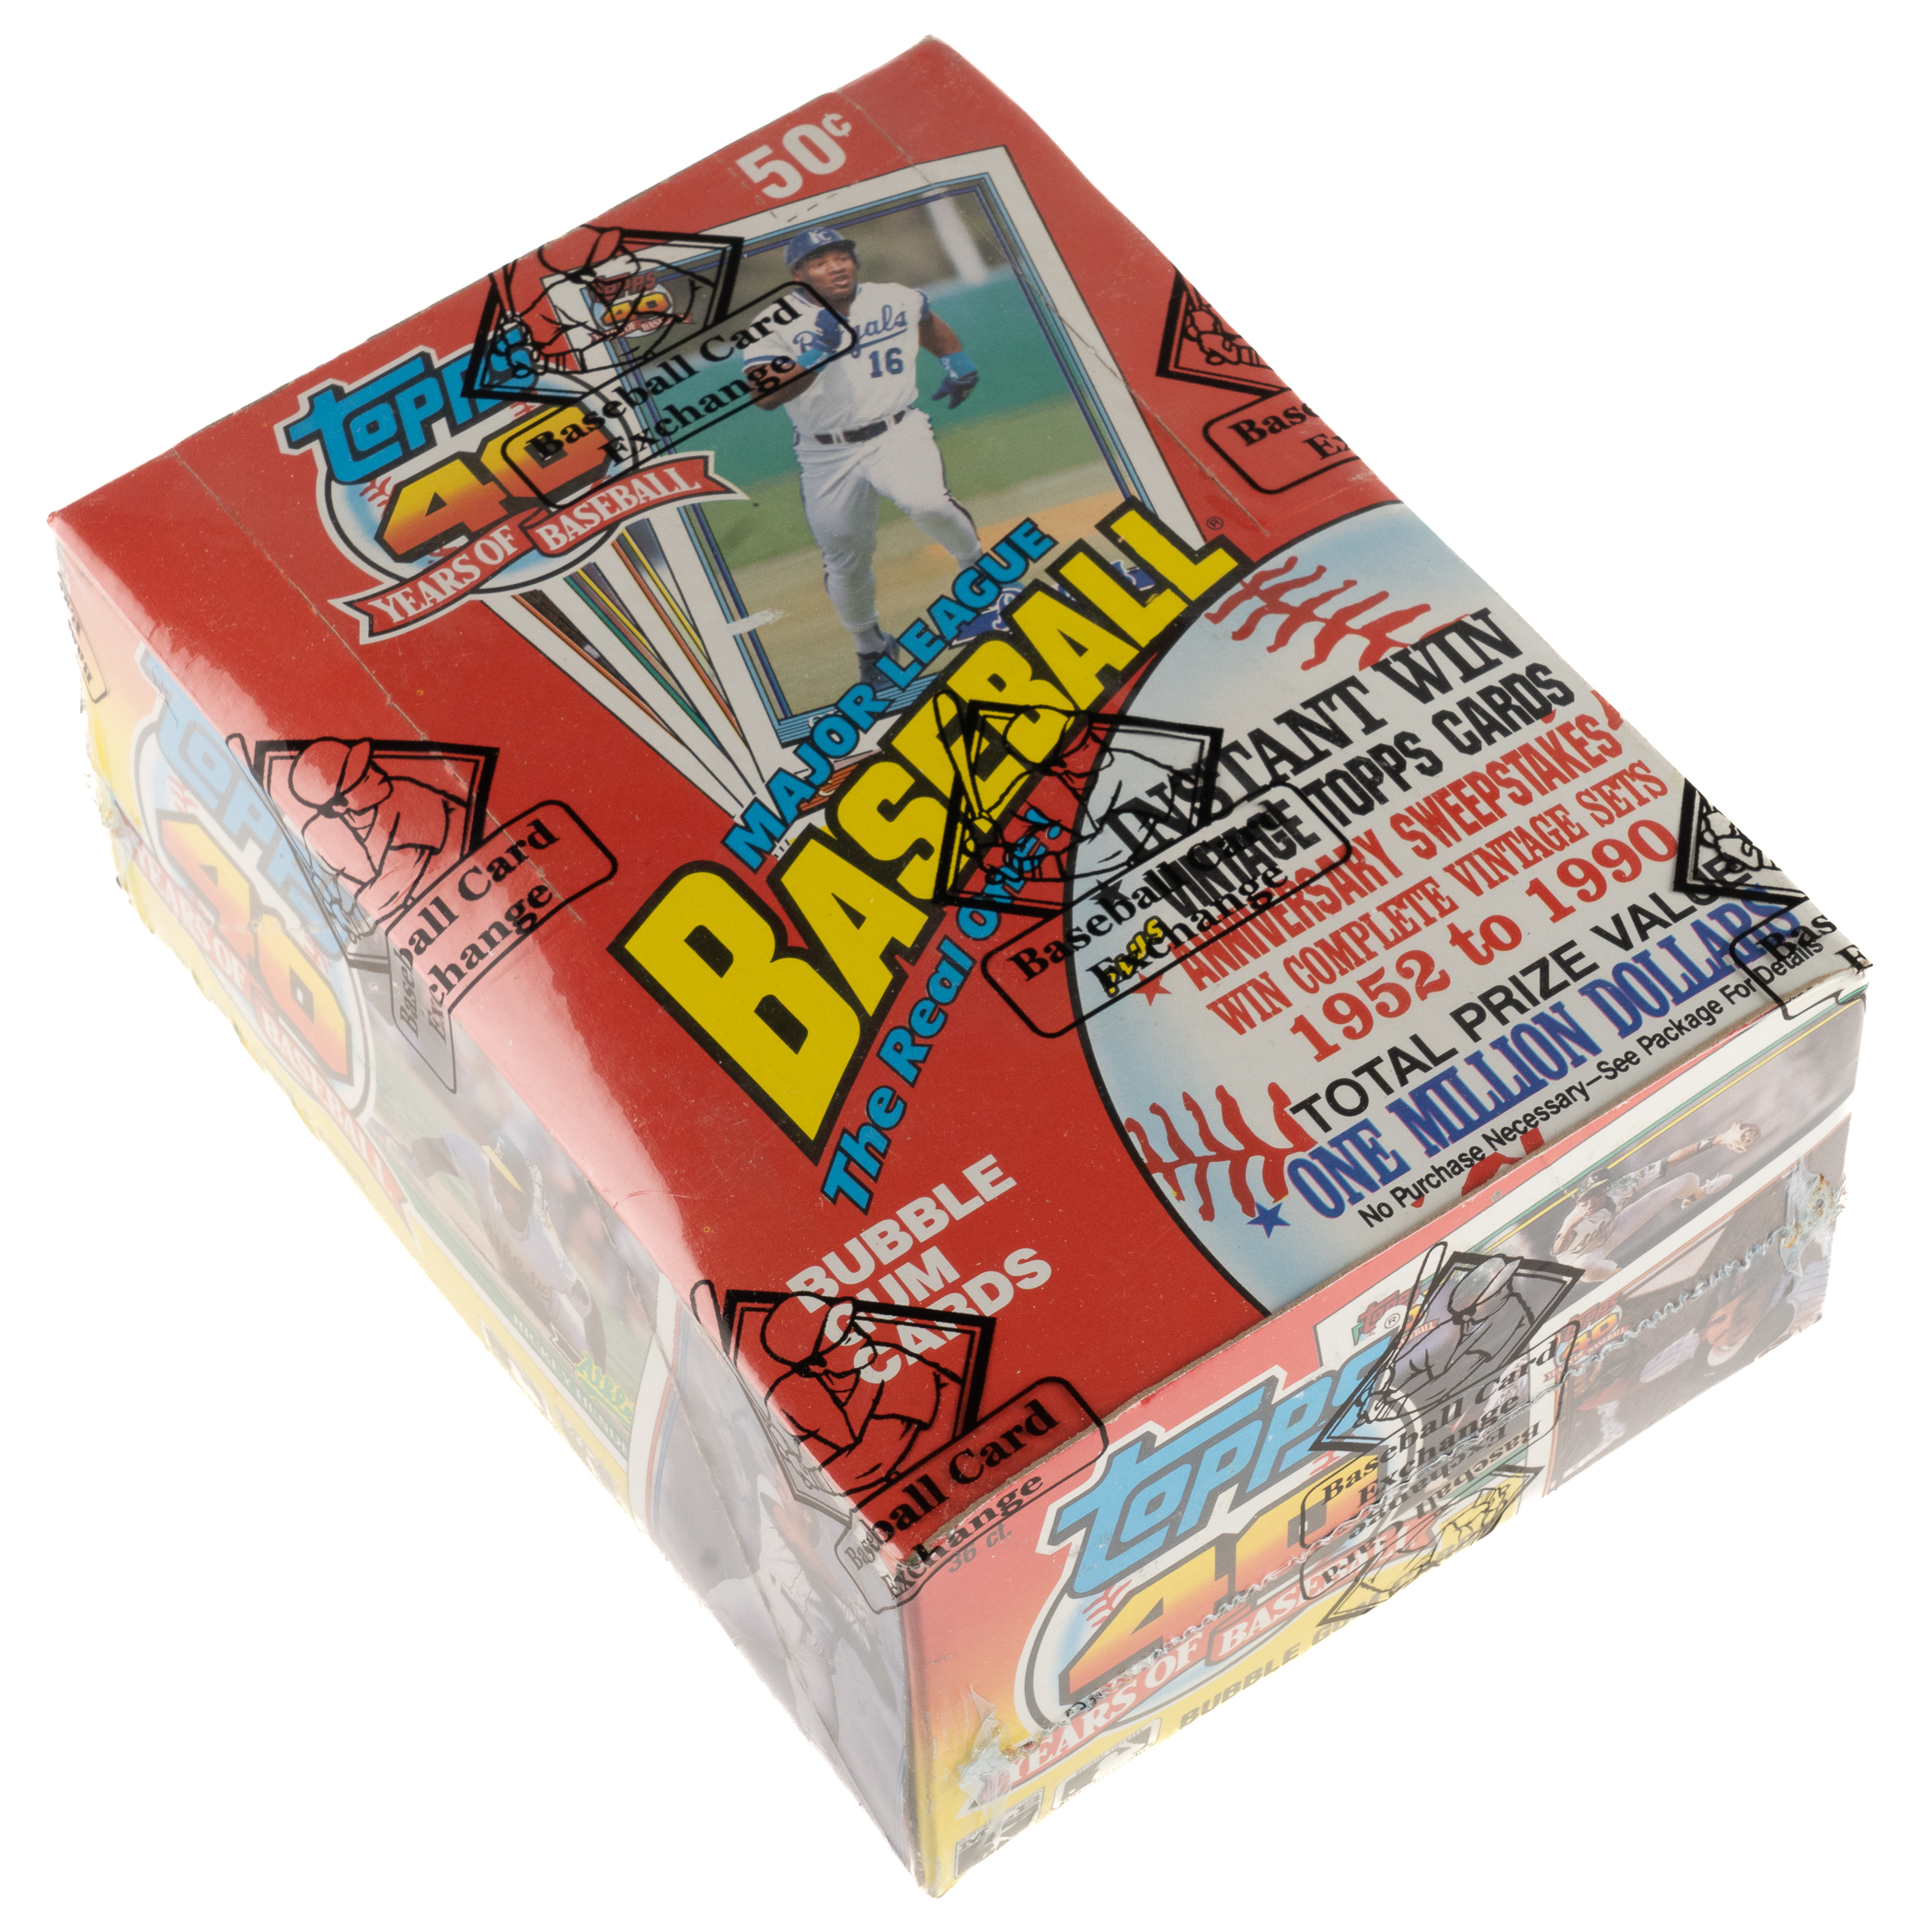 A 1991 Topps Desert Shield Unopened Wax Box led the way in REA's March Auction selling for $37,200